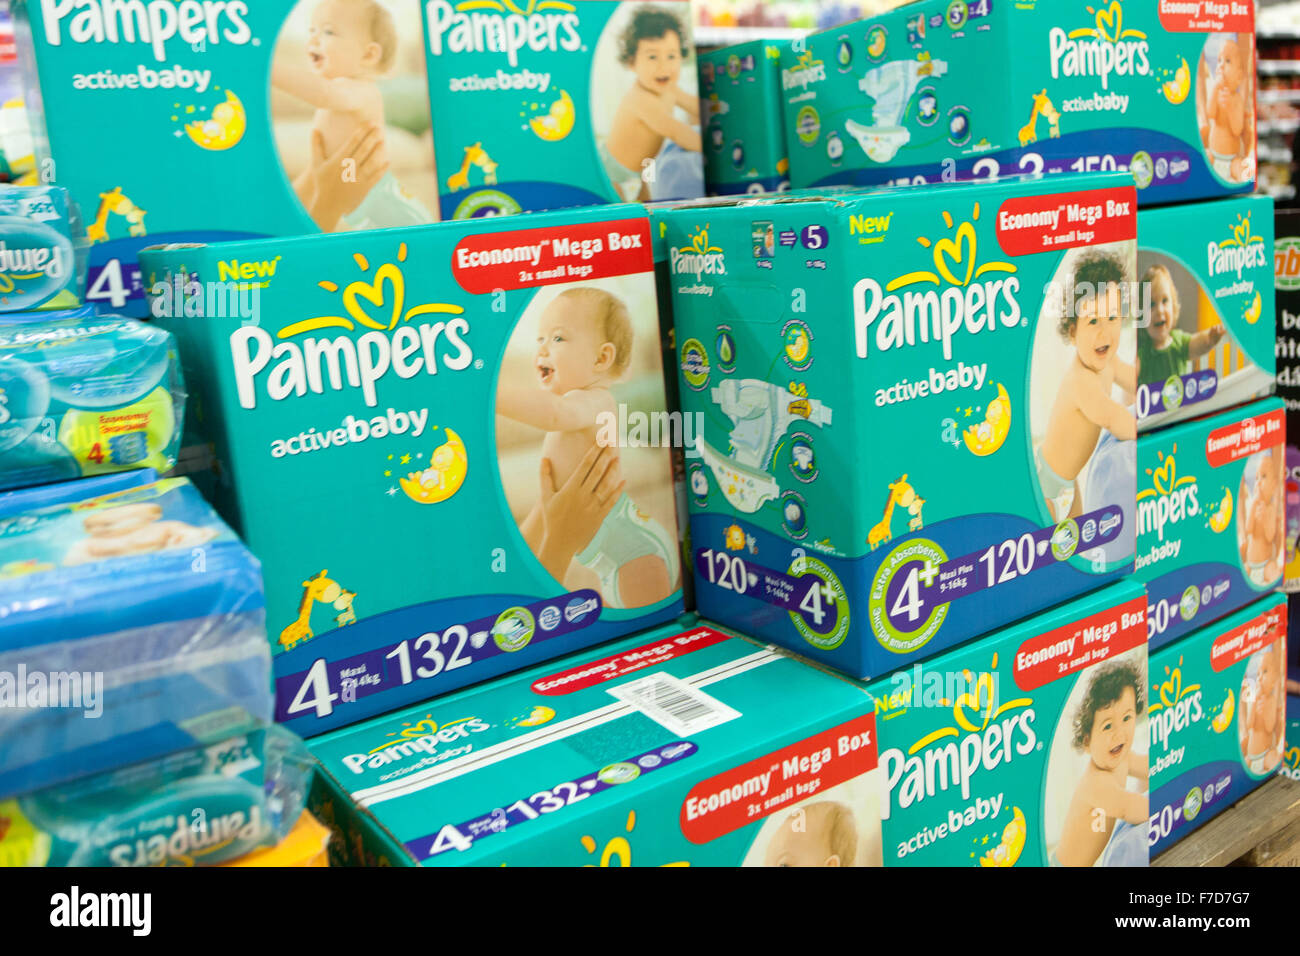 pampers photography